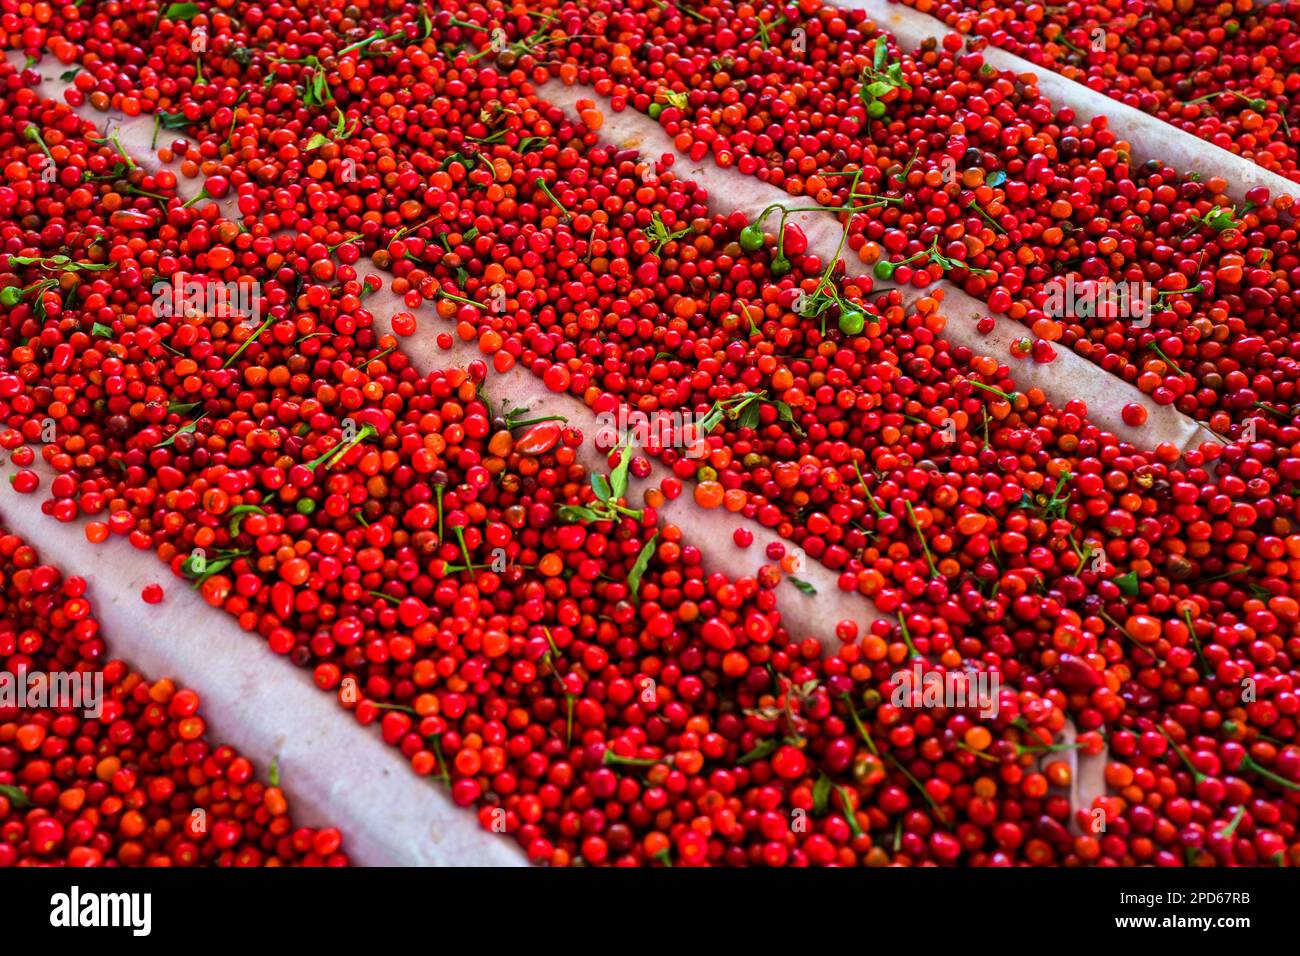 Chiltepin peppers, a wild variety of chili pepper, are seen drying on a tarp during the sun-drying process on a farm near Baviácora, Sonora, Mexico. Stock Photo